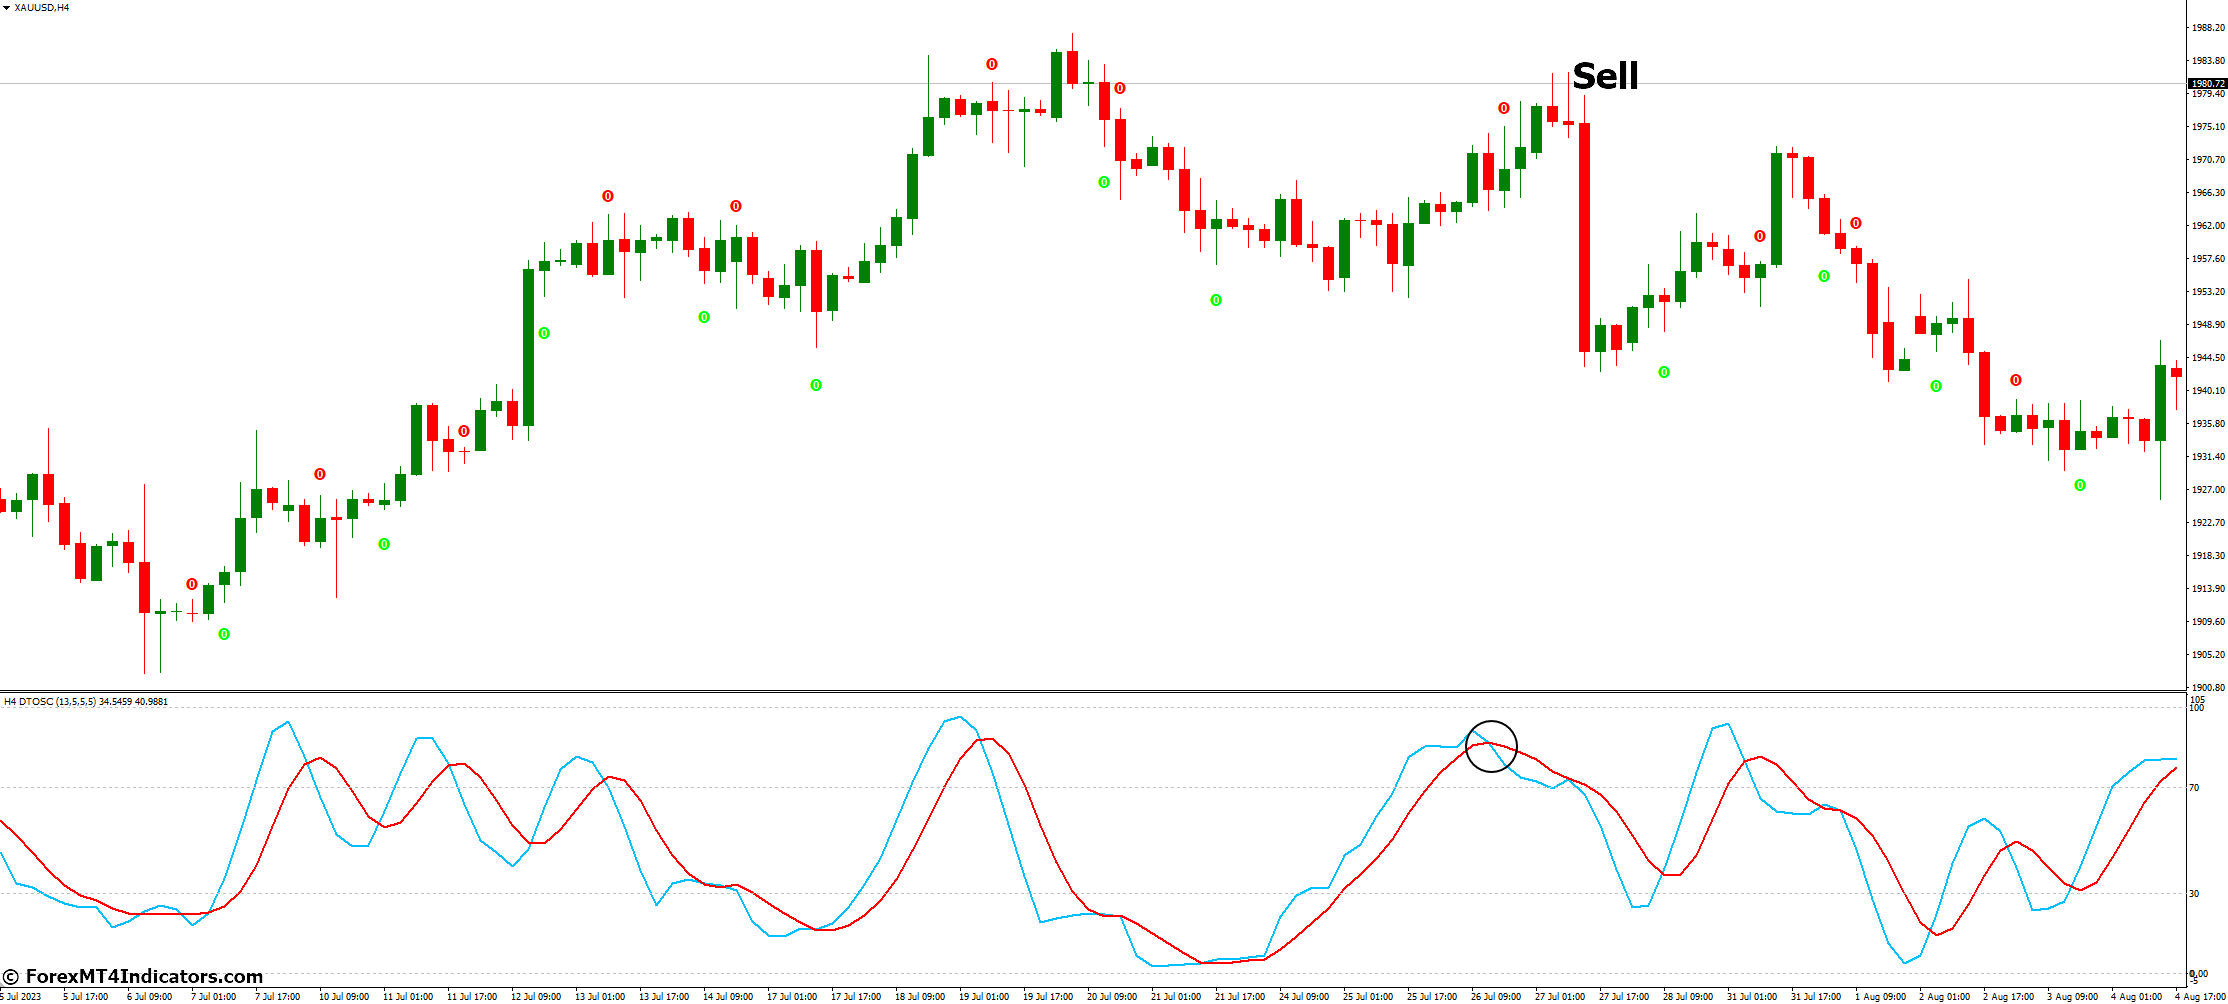 How to Trade with DTOSC MT4 Indicator - Sell Entry